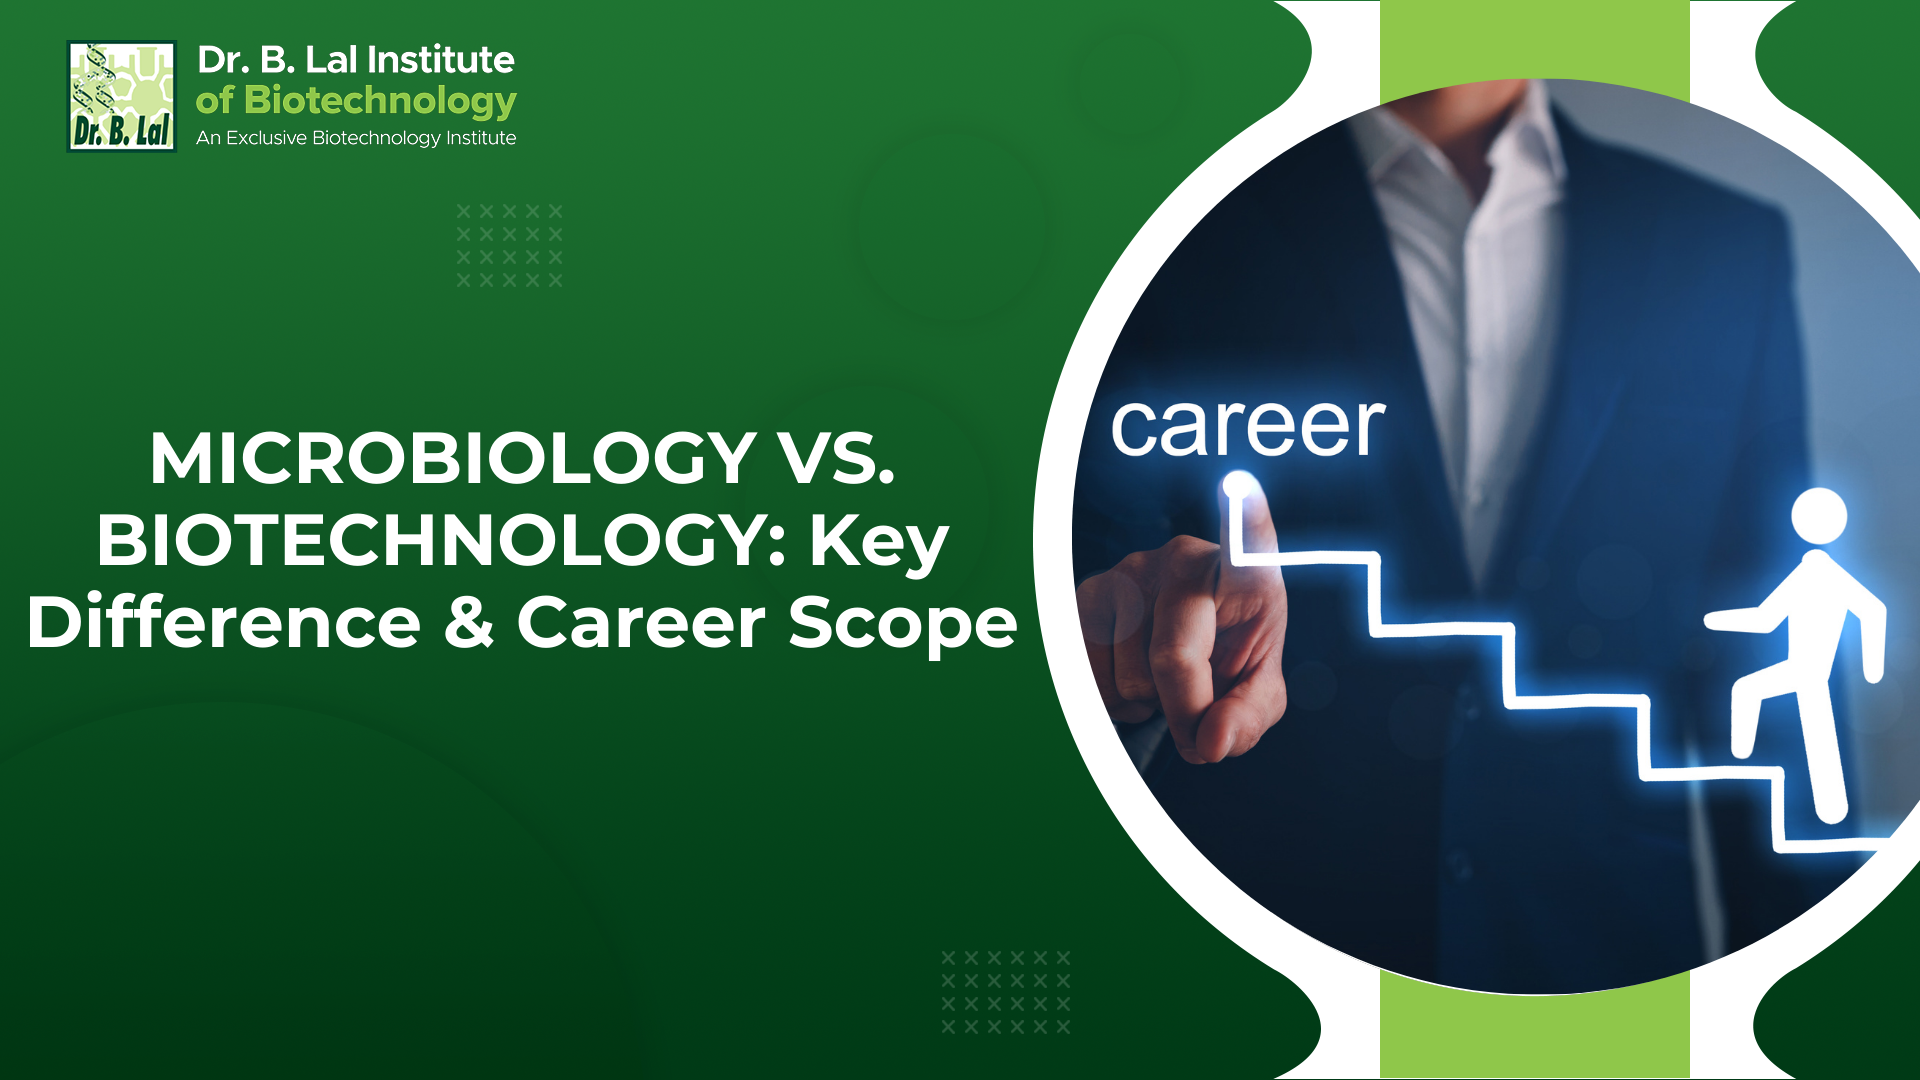 Microbiology vs Biotechnology: Key Difference & Career Scope